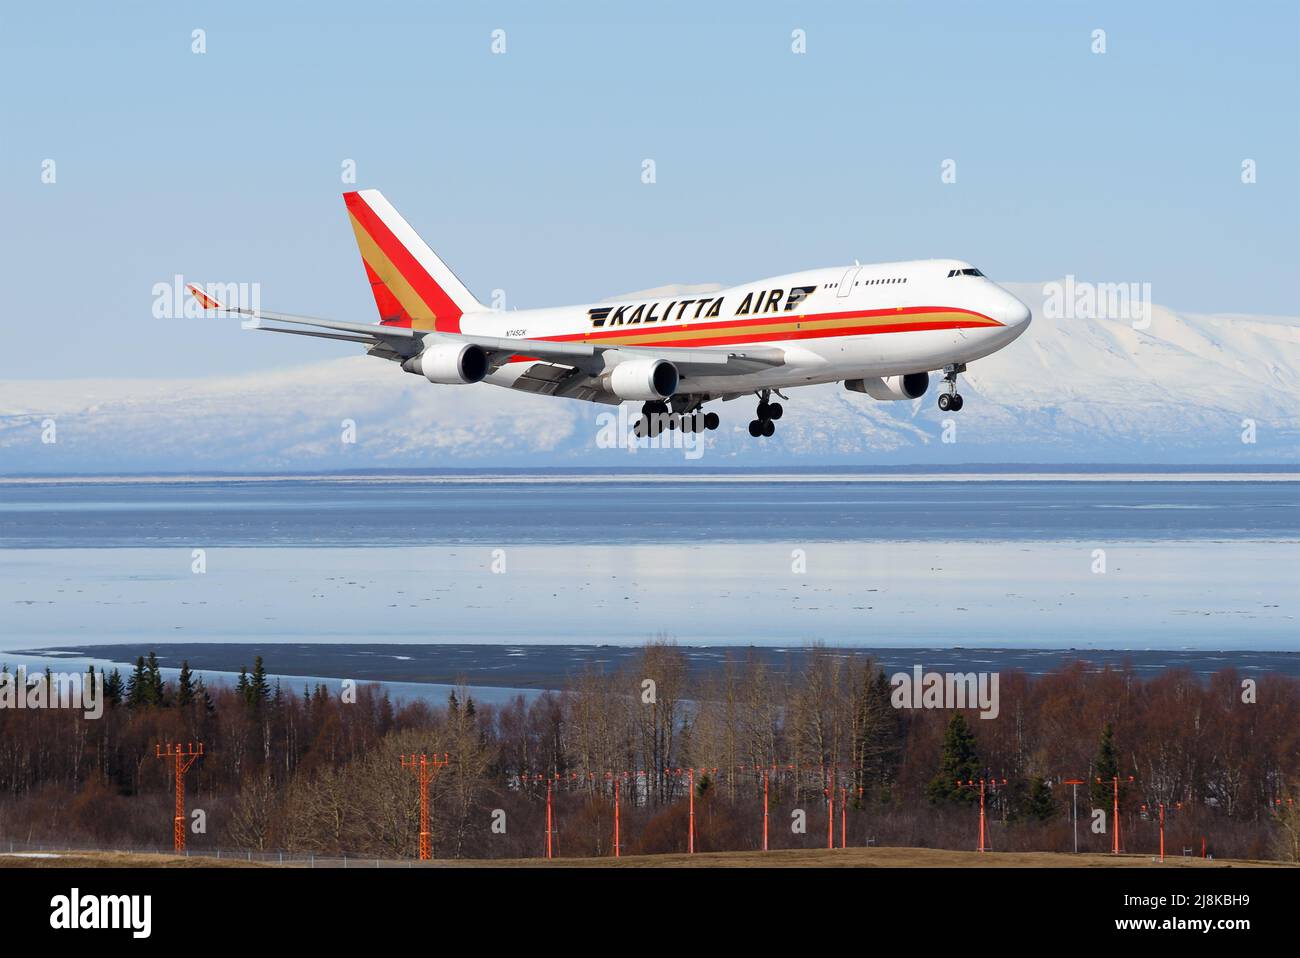 Kalitta Air Cargo Boeing 747 freighter plane landing. Large cargo airplane 747-400F. Aircraft 747F arrival in Anchorage Airport in Alaska, USA. Stock Photo